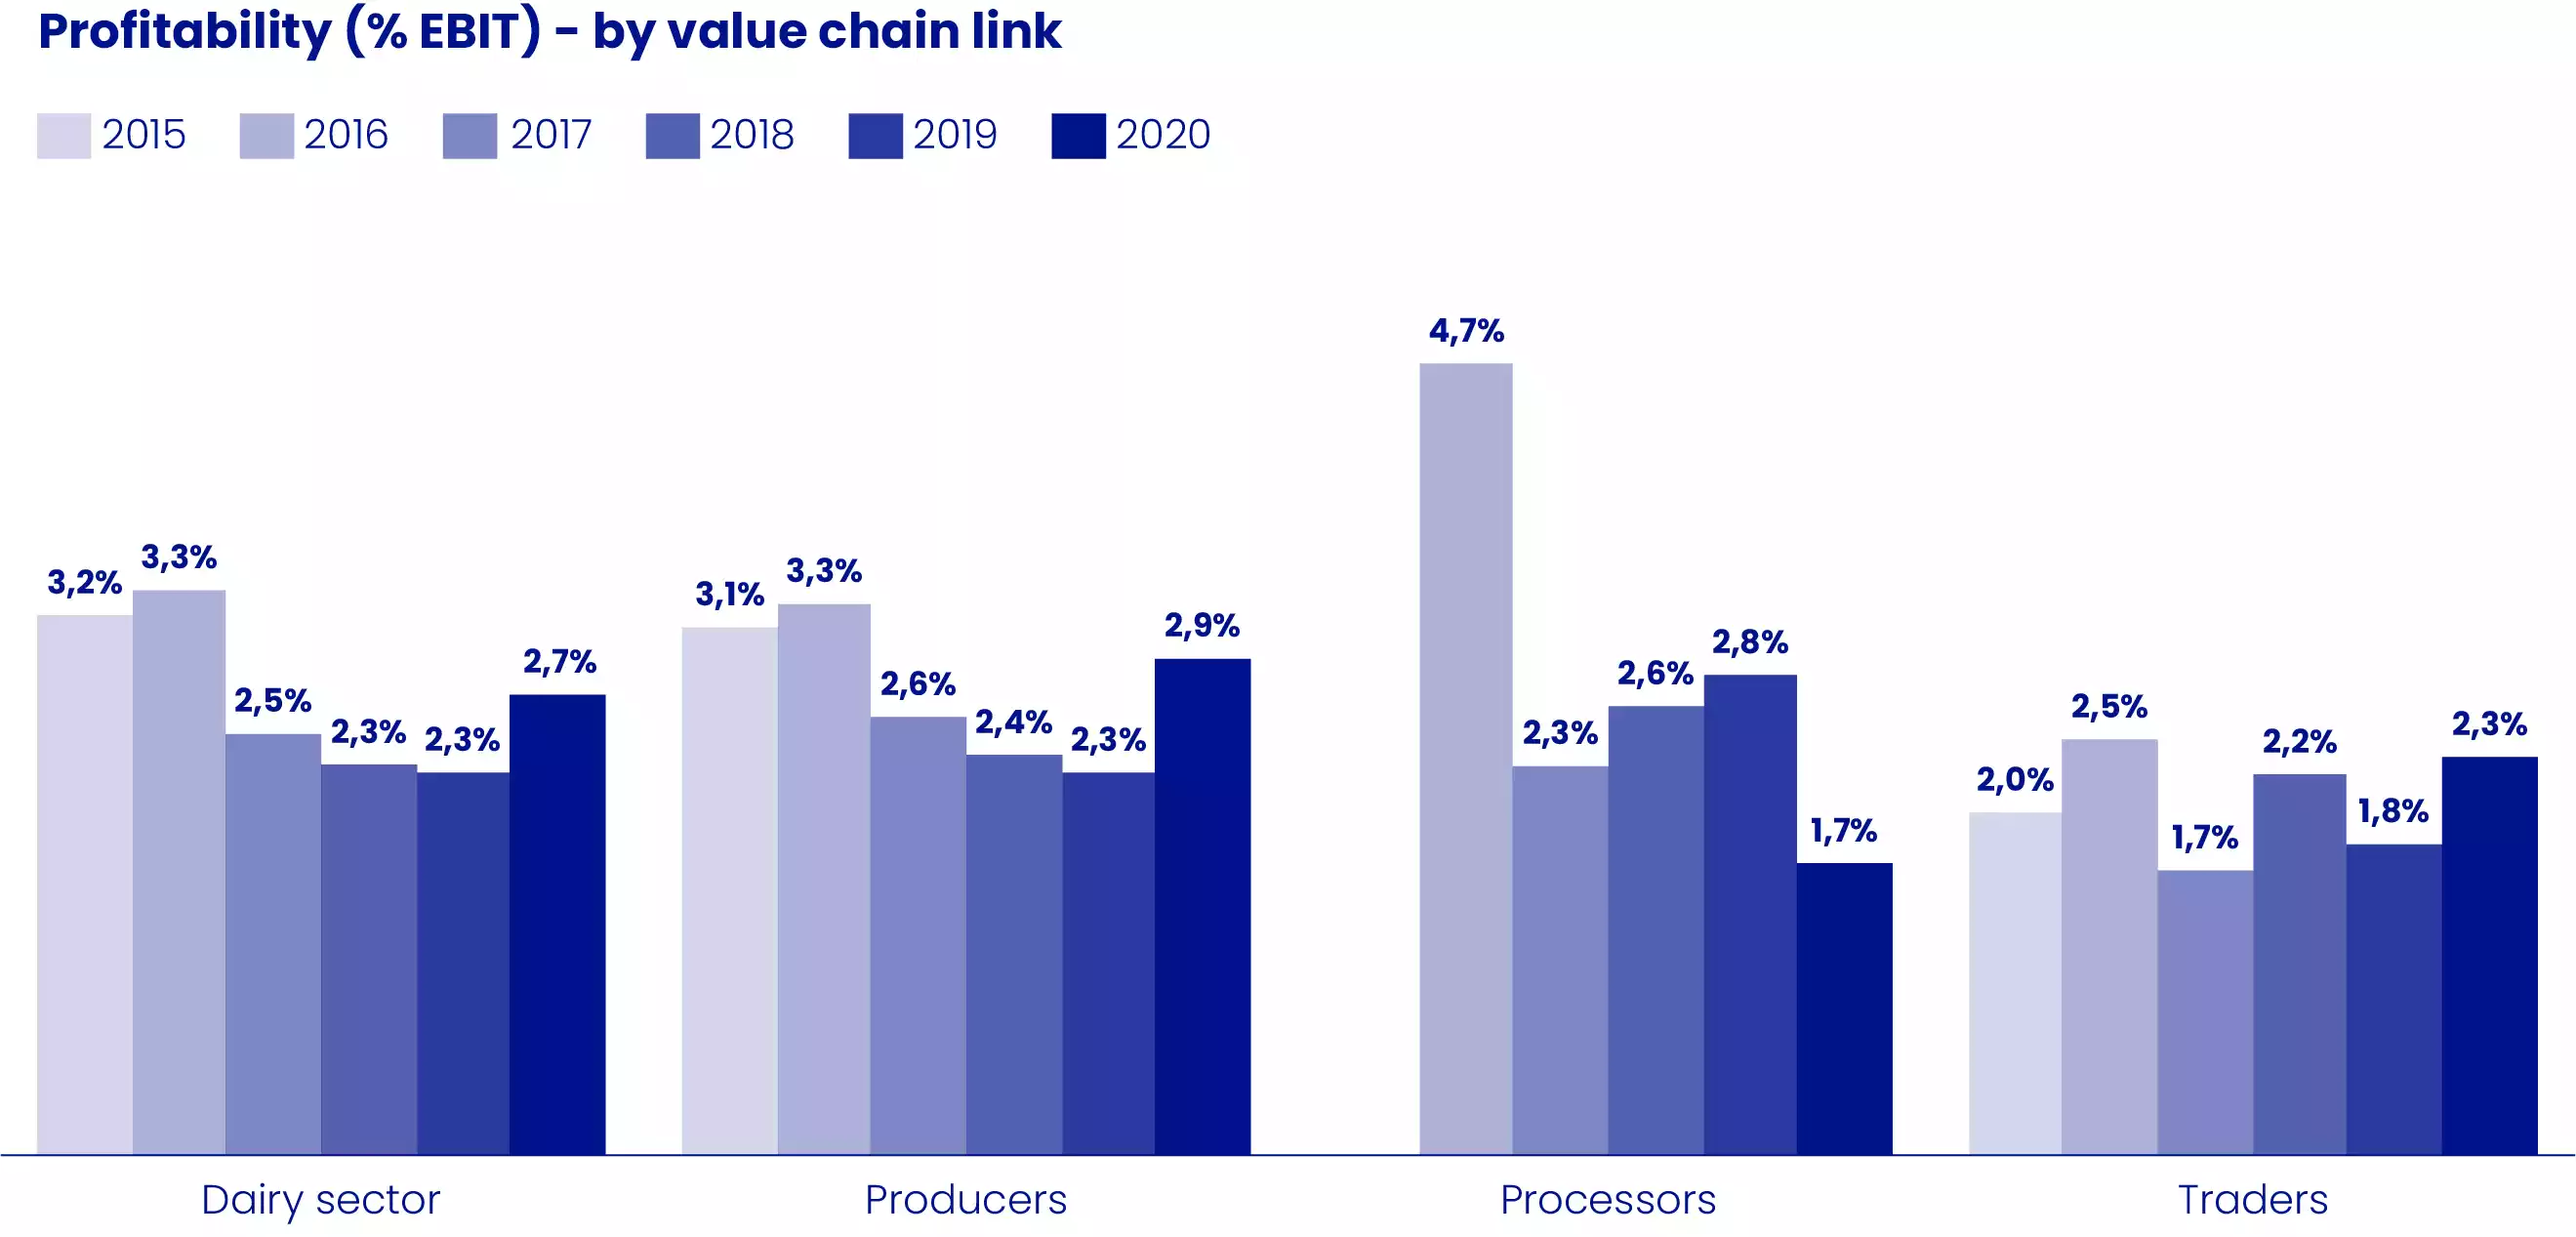 Profitability (% EBIT) - by value chain link